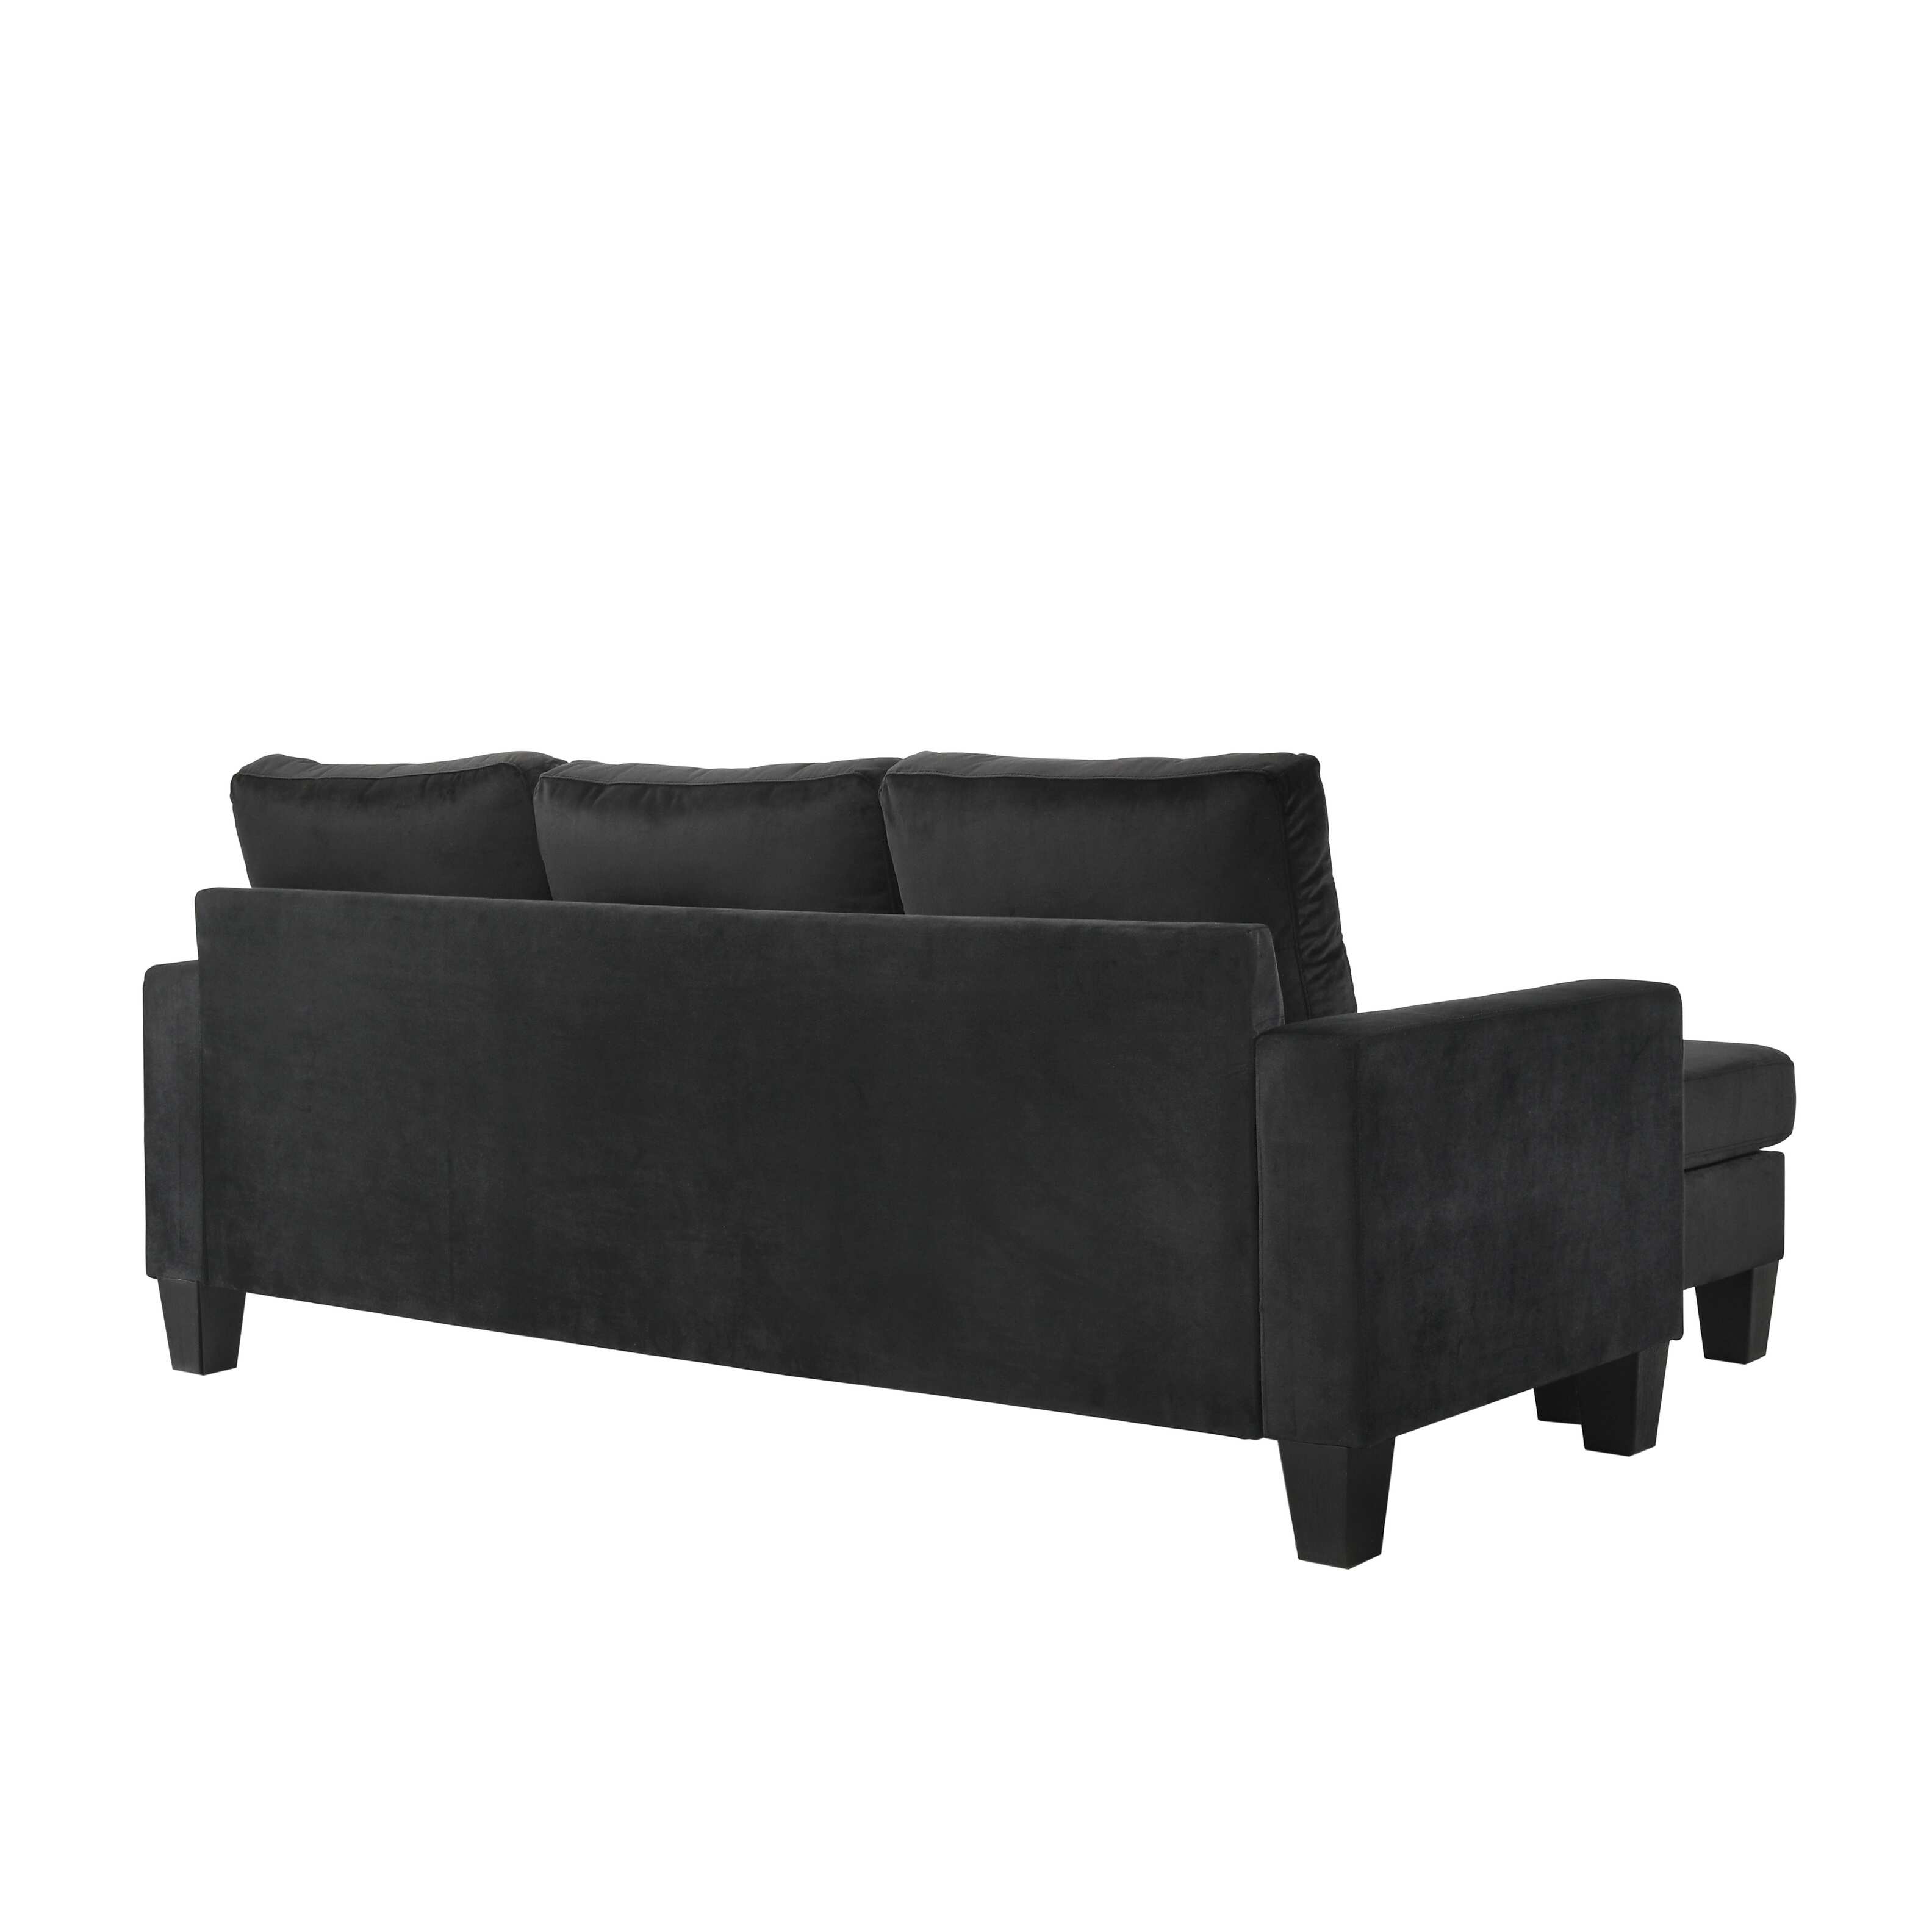 Modern Sectional Sofa, Home Theater Sets Sectional Sofa Chaise with Ottoman and Cushion for Living Room Furniture.